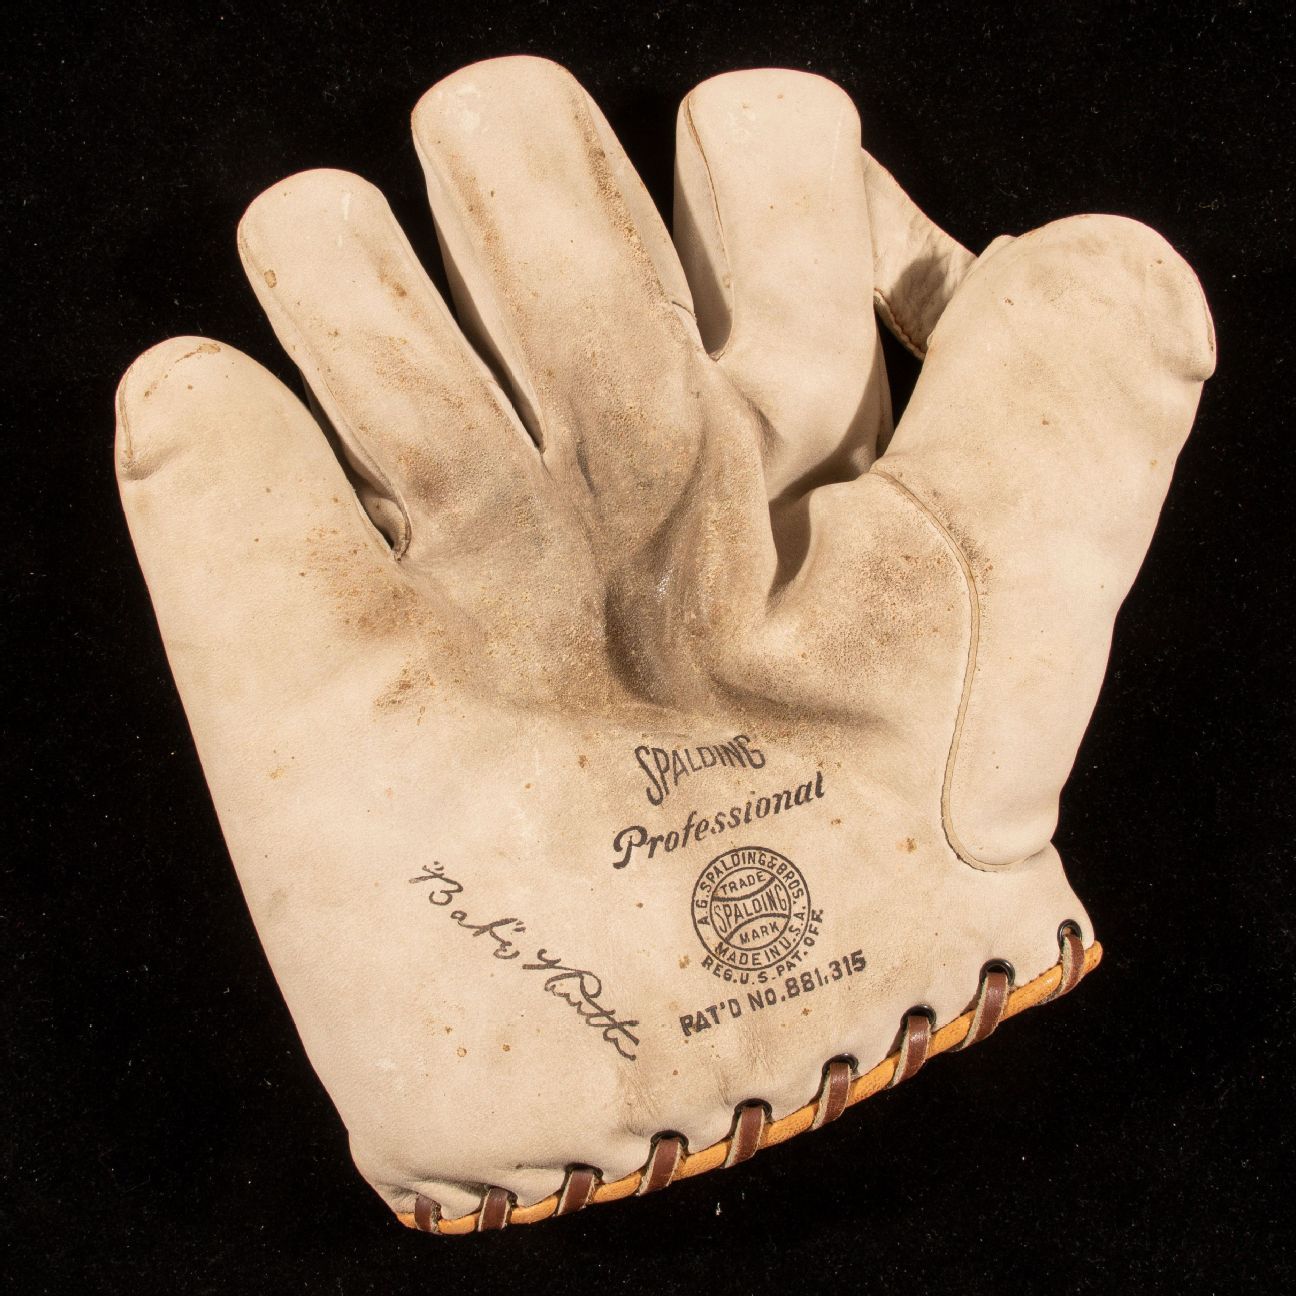 Babe Ruth glove fetches record .53M at auction